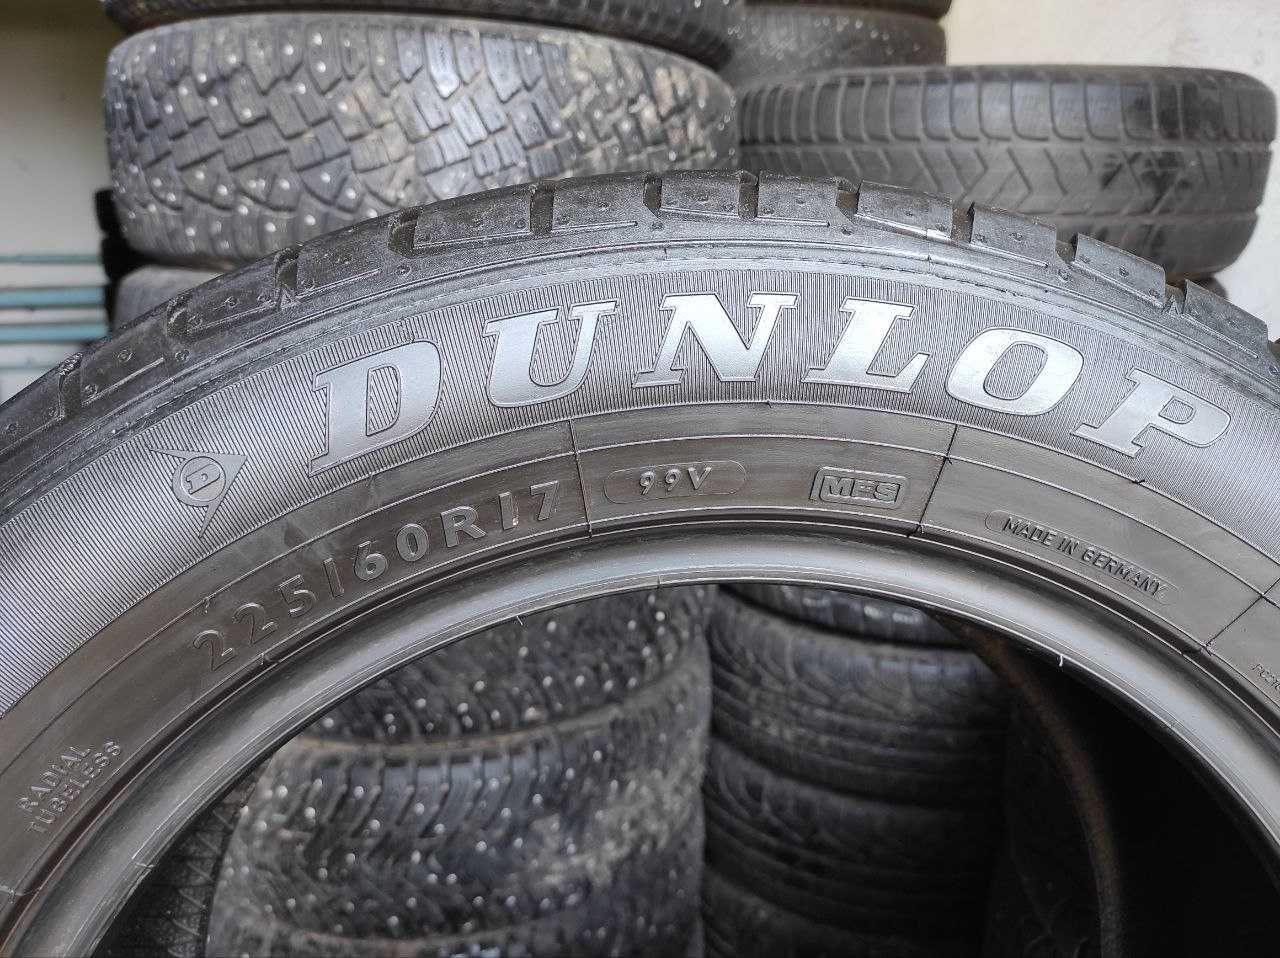 Dunlop SP Sport Maxx TT 225/60r17 made in Germany 2шт 17год, 5мм, ЛЕТО